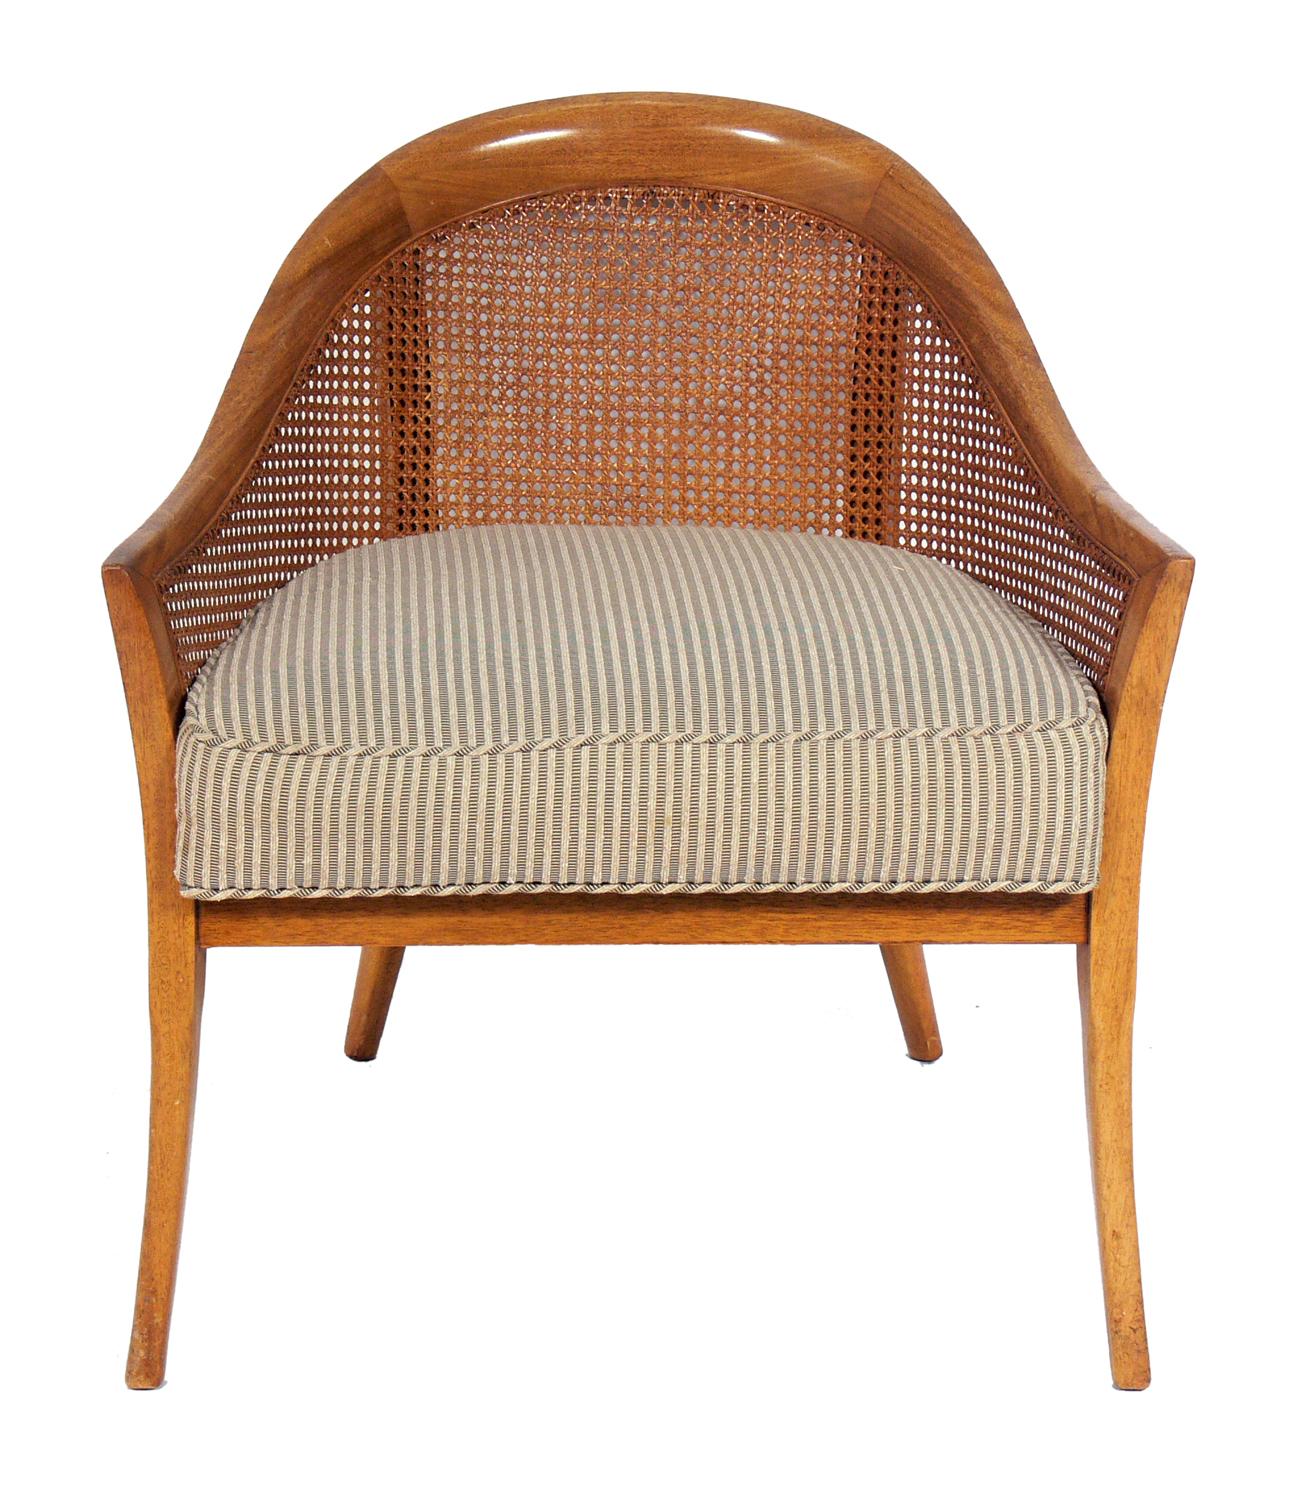 Pair of Curvaceous modern lounge chairs, designed by Harvey Probber, American, circa 1960s. They are currently being reupholstered and can be completed in your fabric. The price noted includes reupholstery in your fabric. Simply send us your fabric